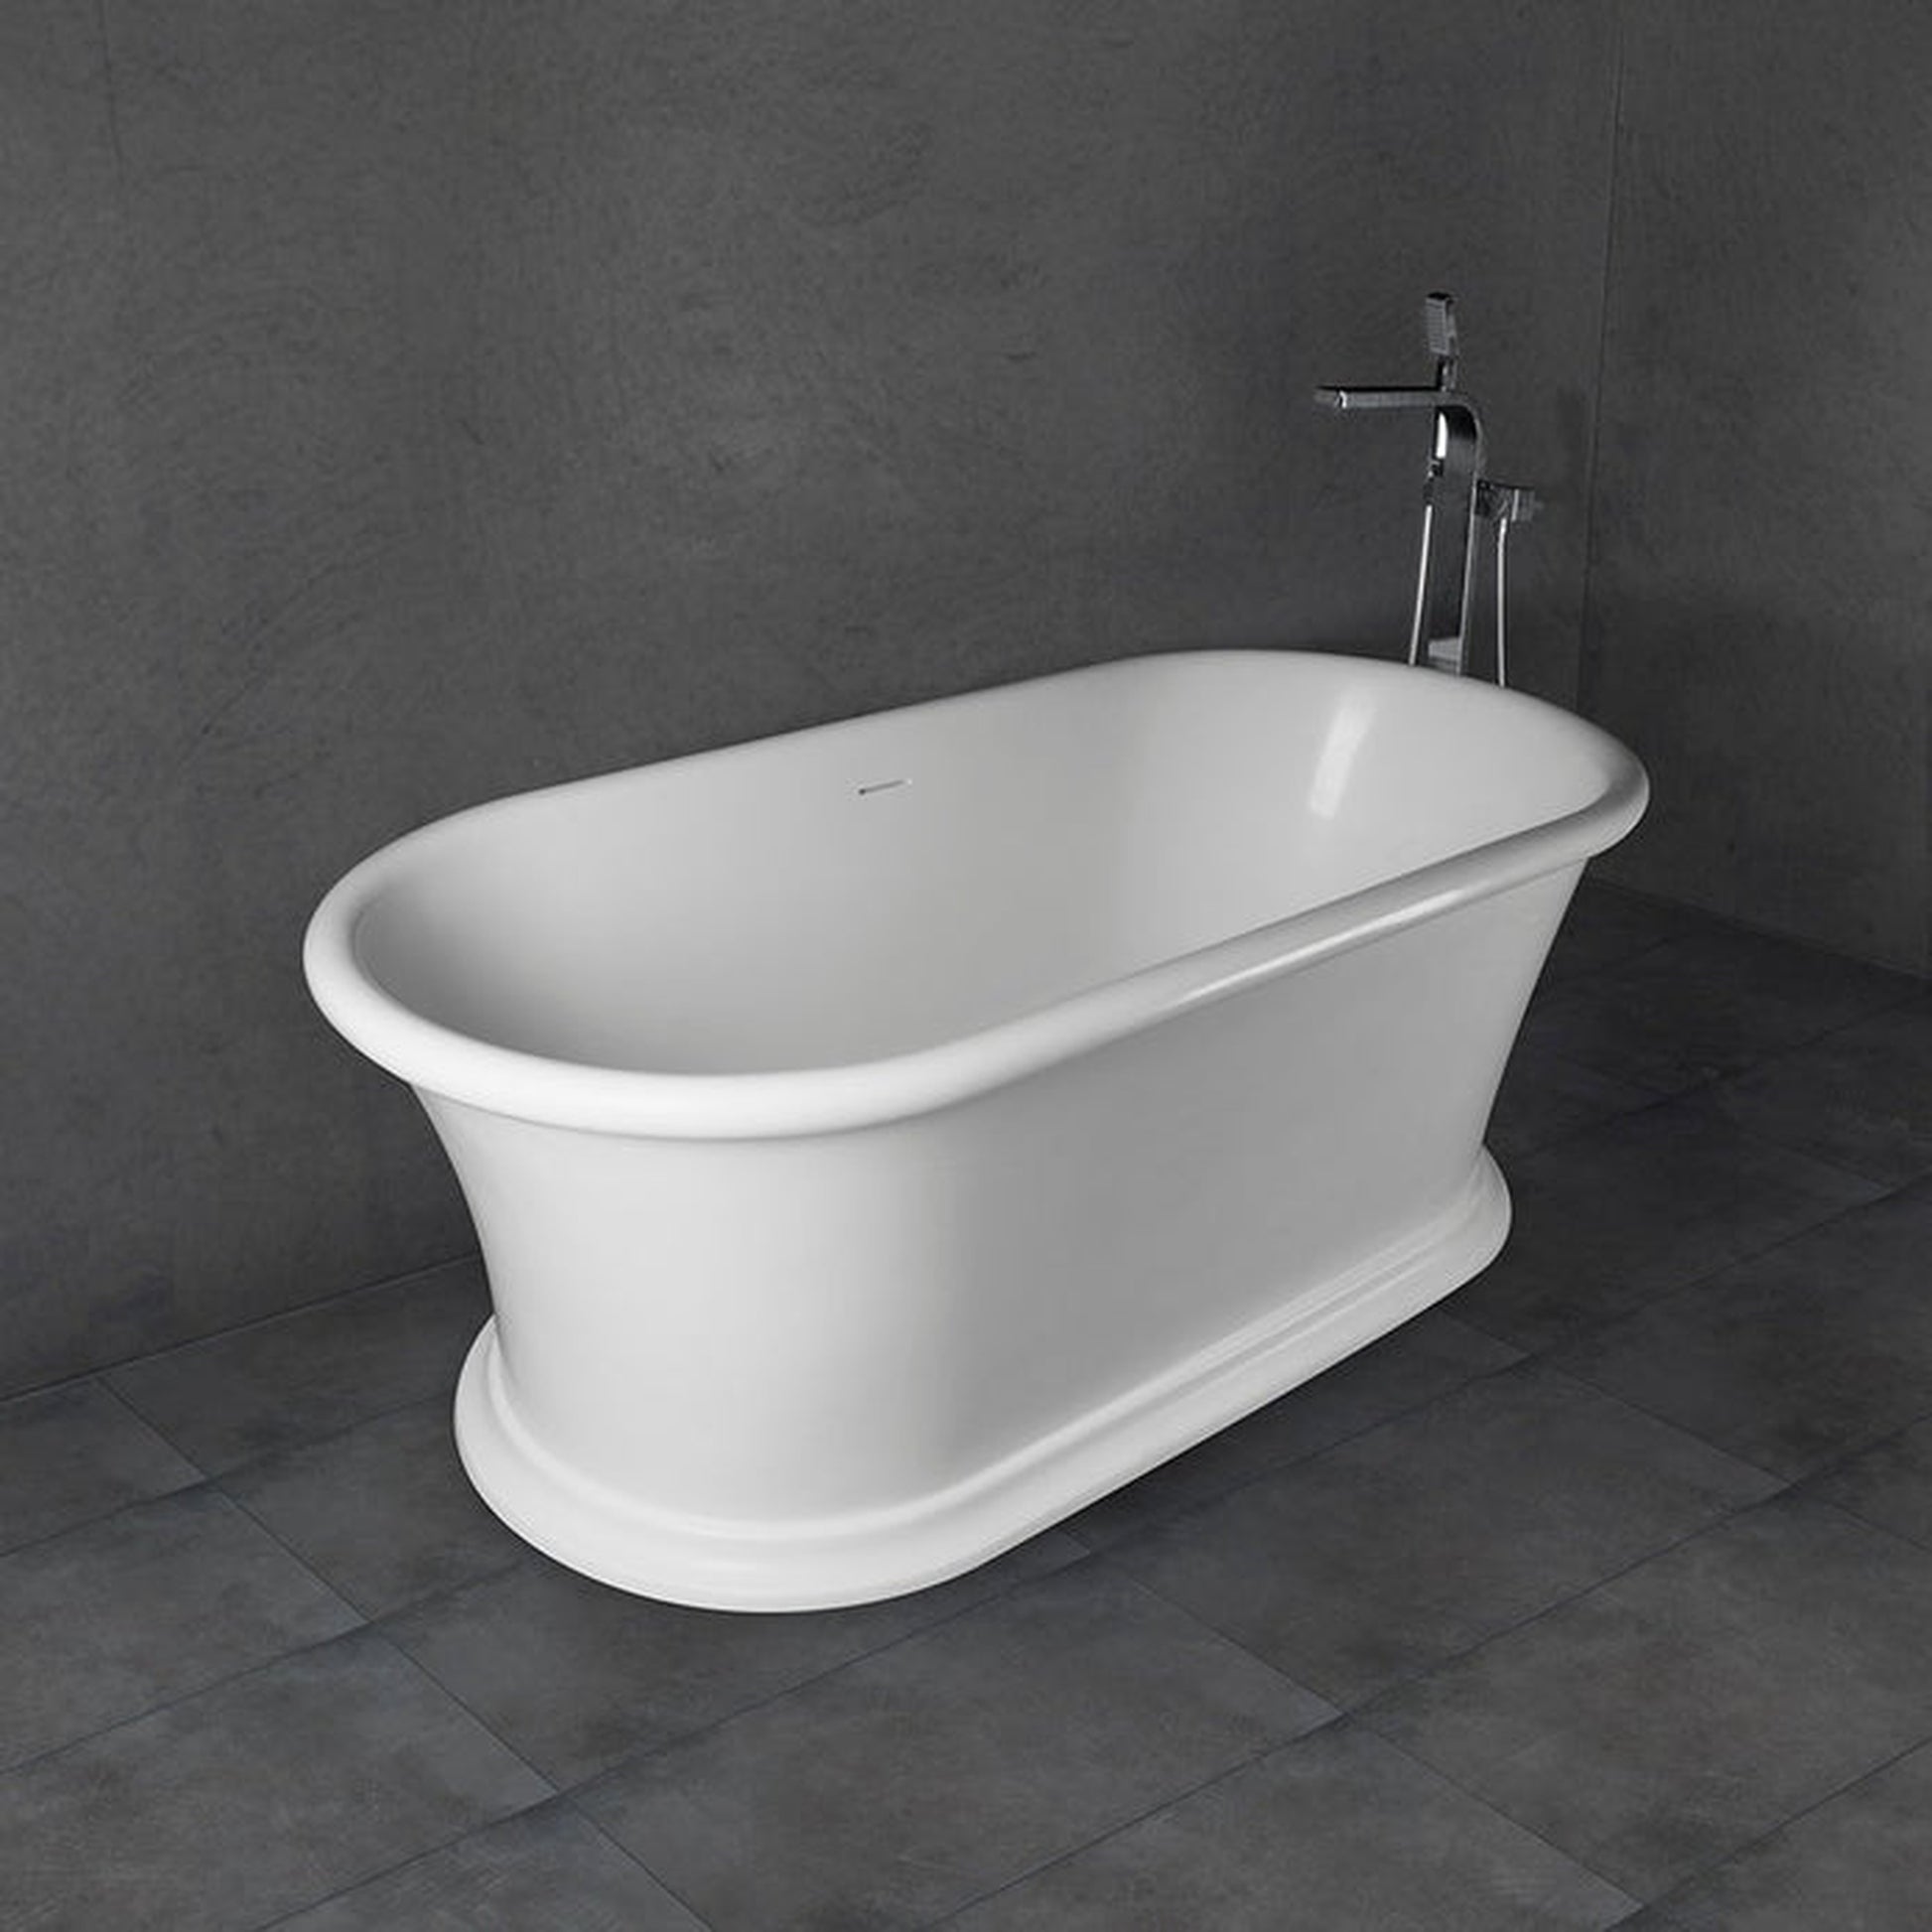 Vanity Art 67" Matte White Flatbottom Freestanding Solid Surface Resin Stone Bathtub With Slotted Overflow and Pop-up Drain